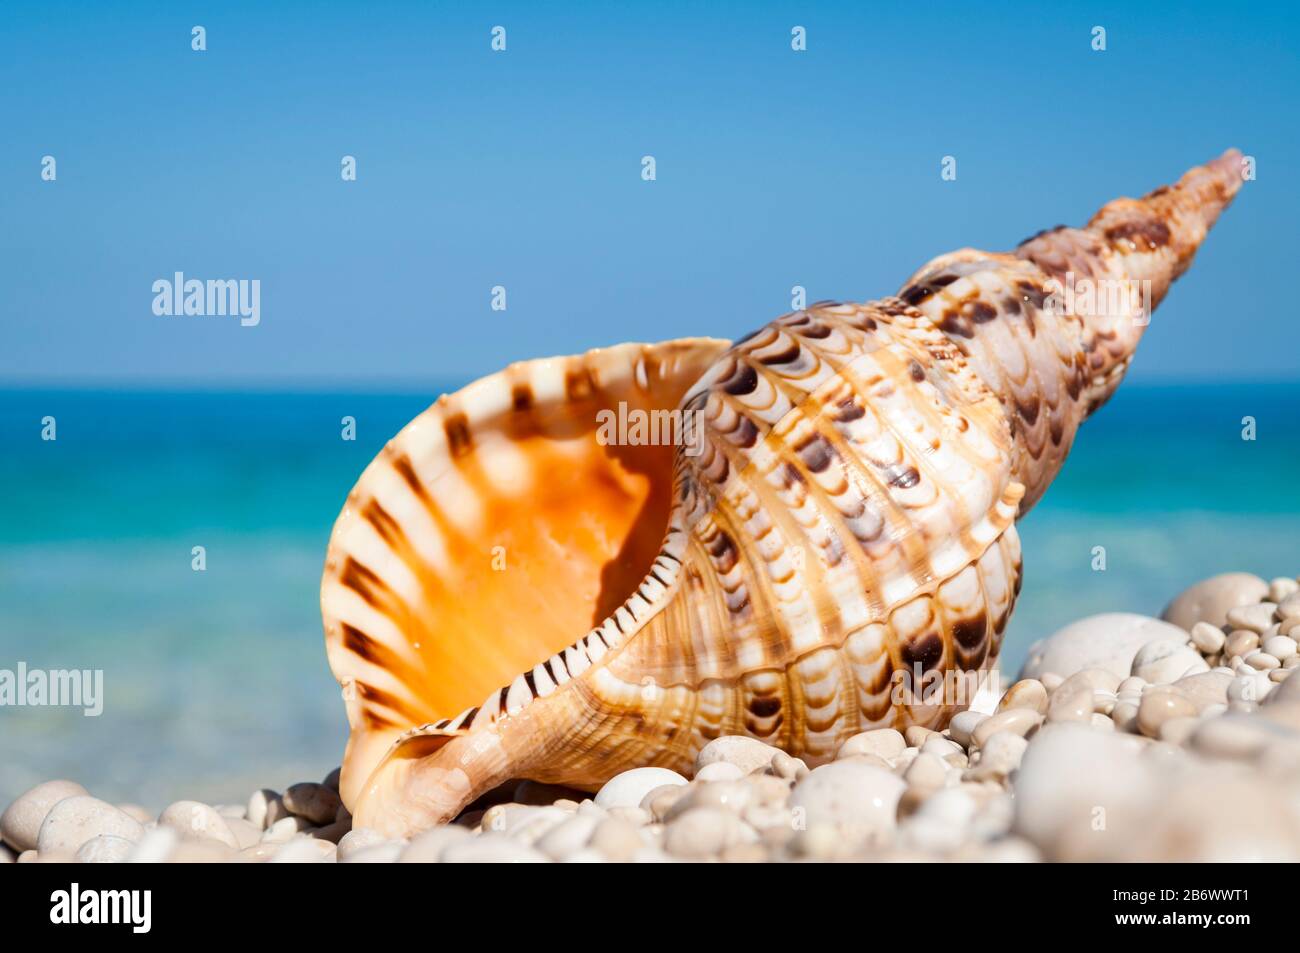 Orange triton shell with strong tiger markings standing upright on bright smooth pebble Mediterranean beach Stock Photo